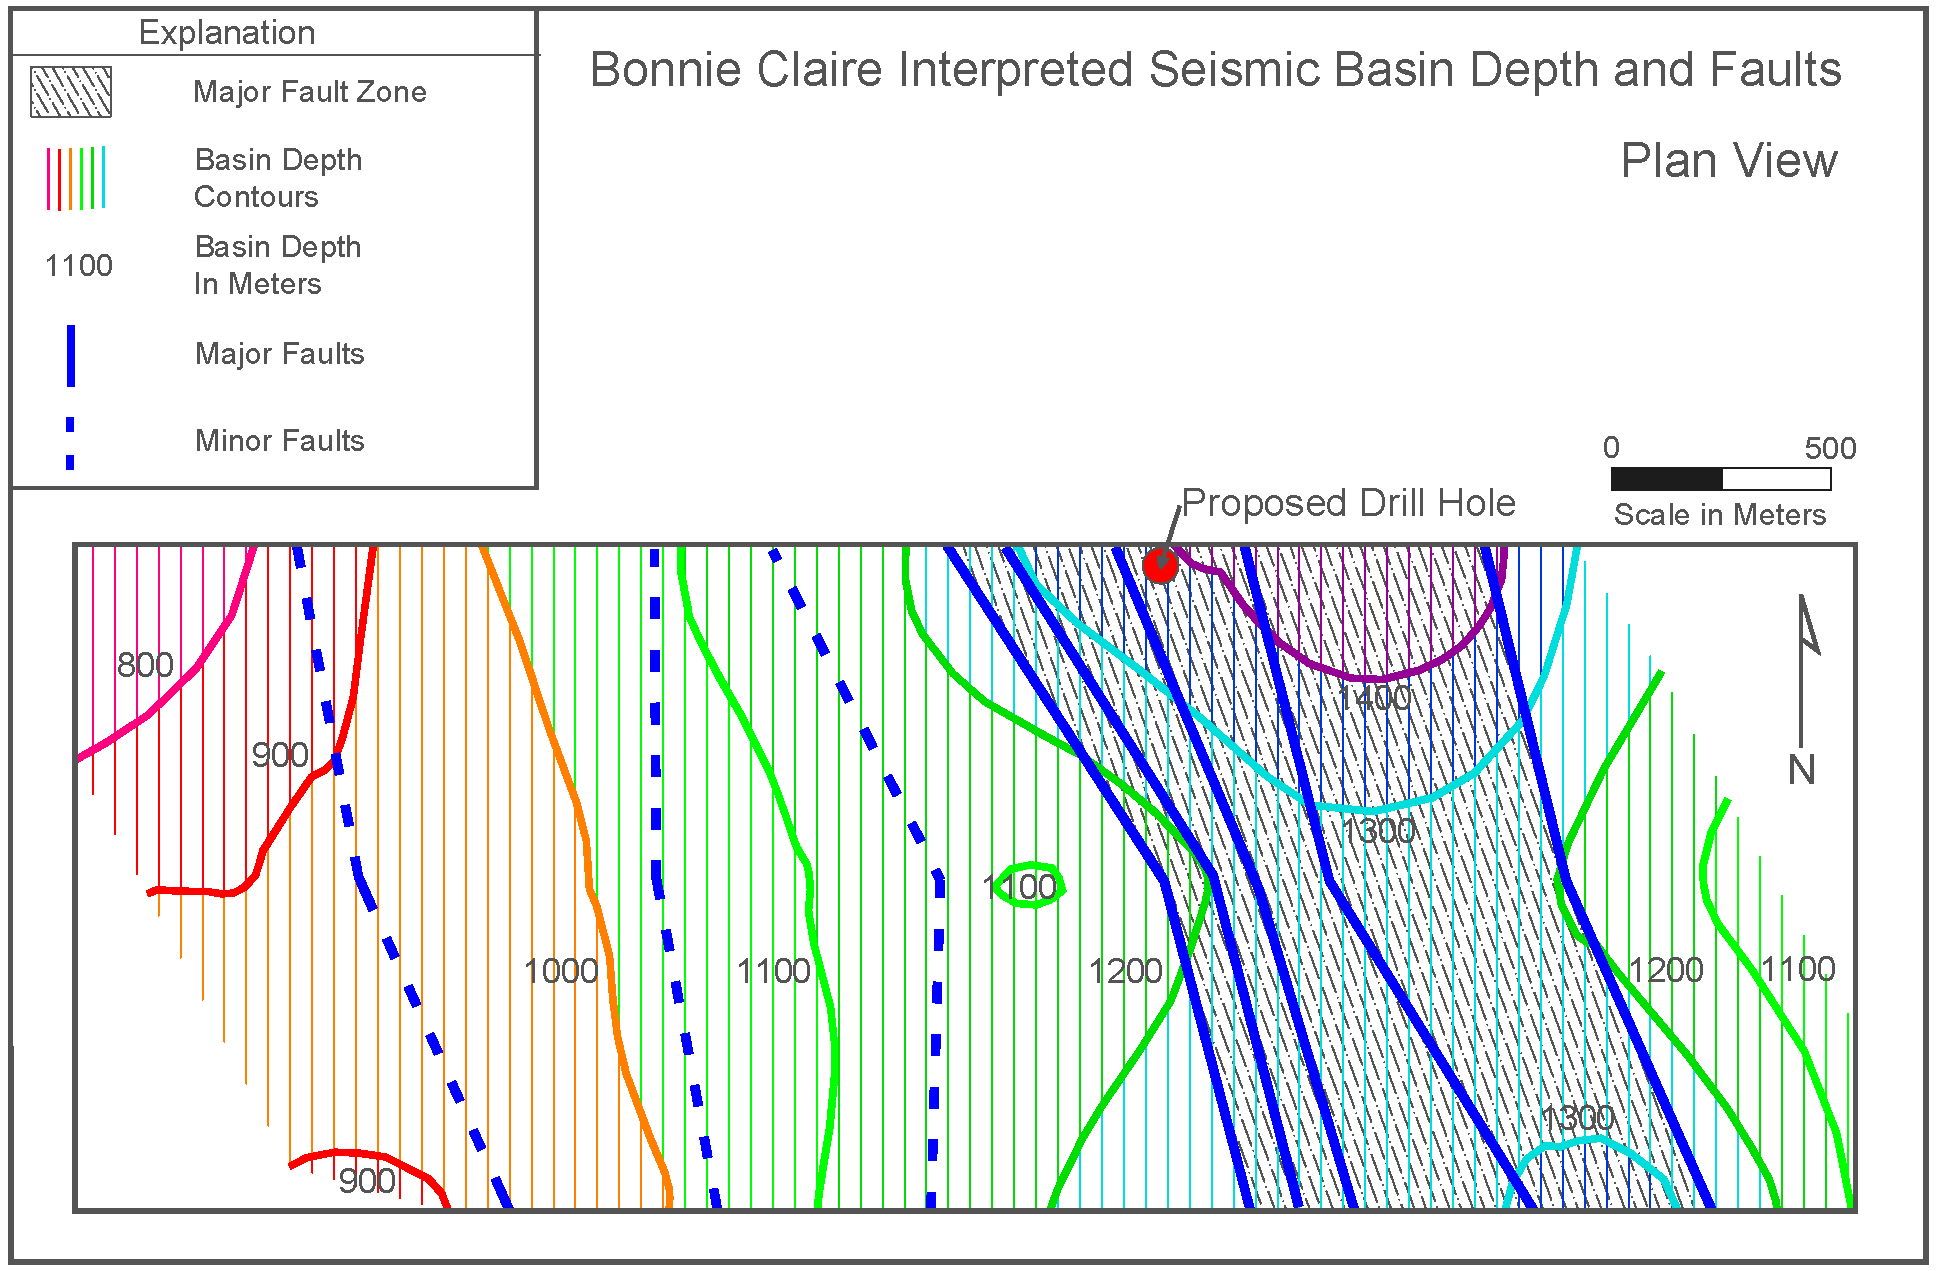 Bonnie Claire Interpreted Seismic Basin Depth and Faults